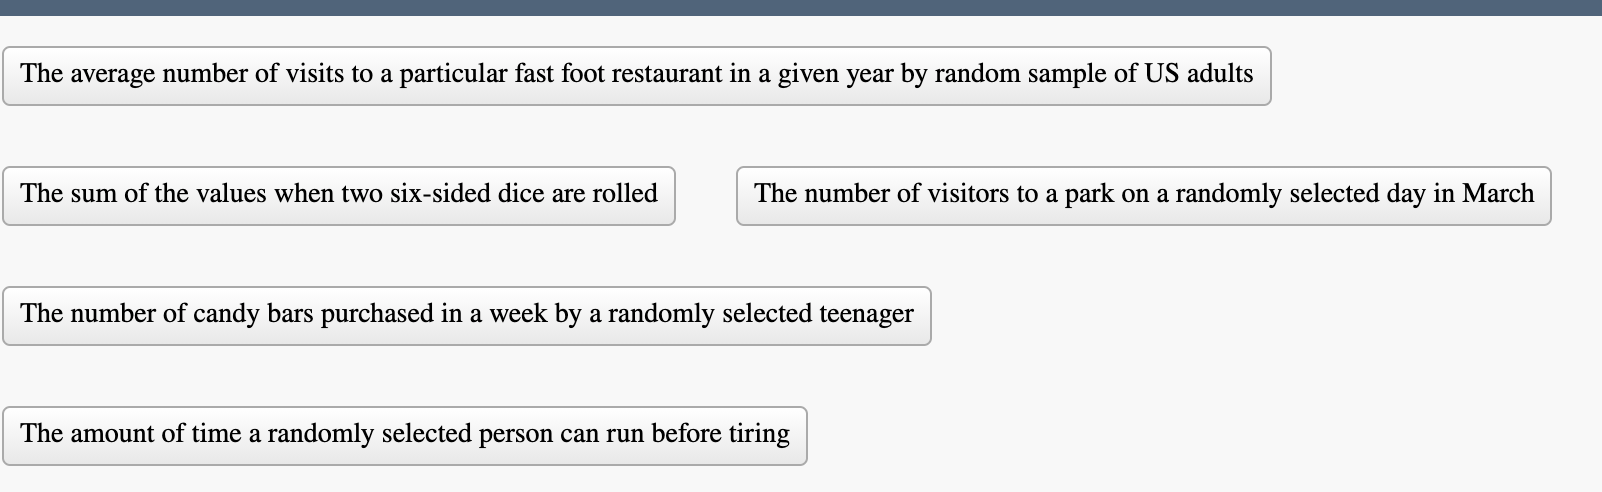 The average number of visits to a particular fast foot restaurant in a given year by random sample of US adults
The sum of the values when two six-sided dice are rolled
The number of visitors to a park on a randomly selected day in March
